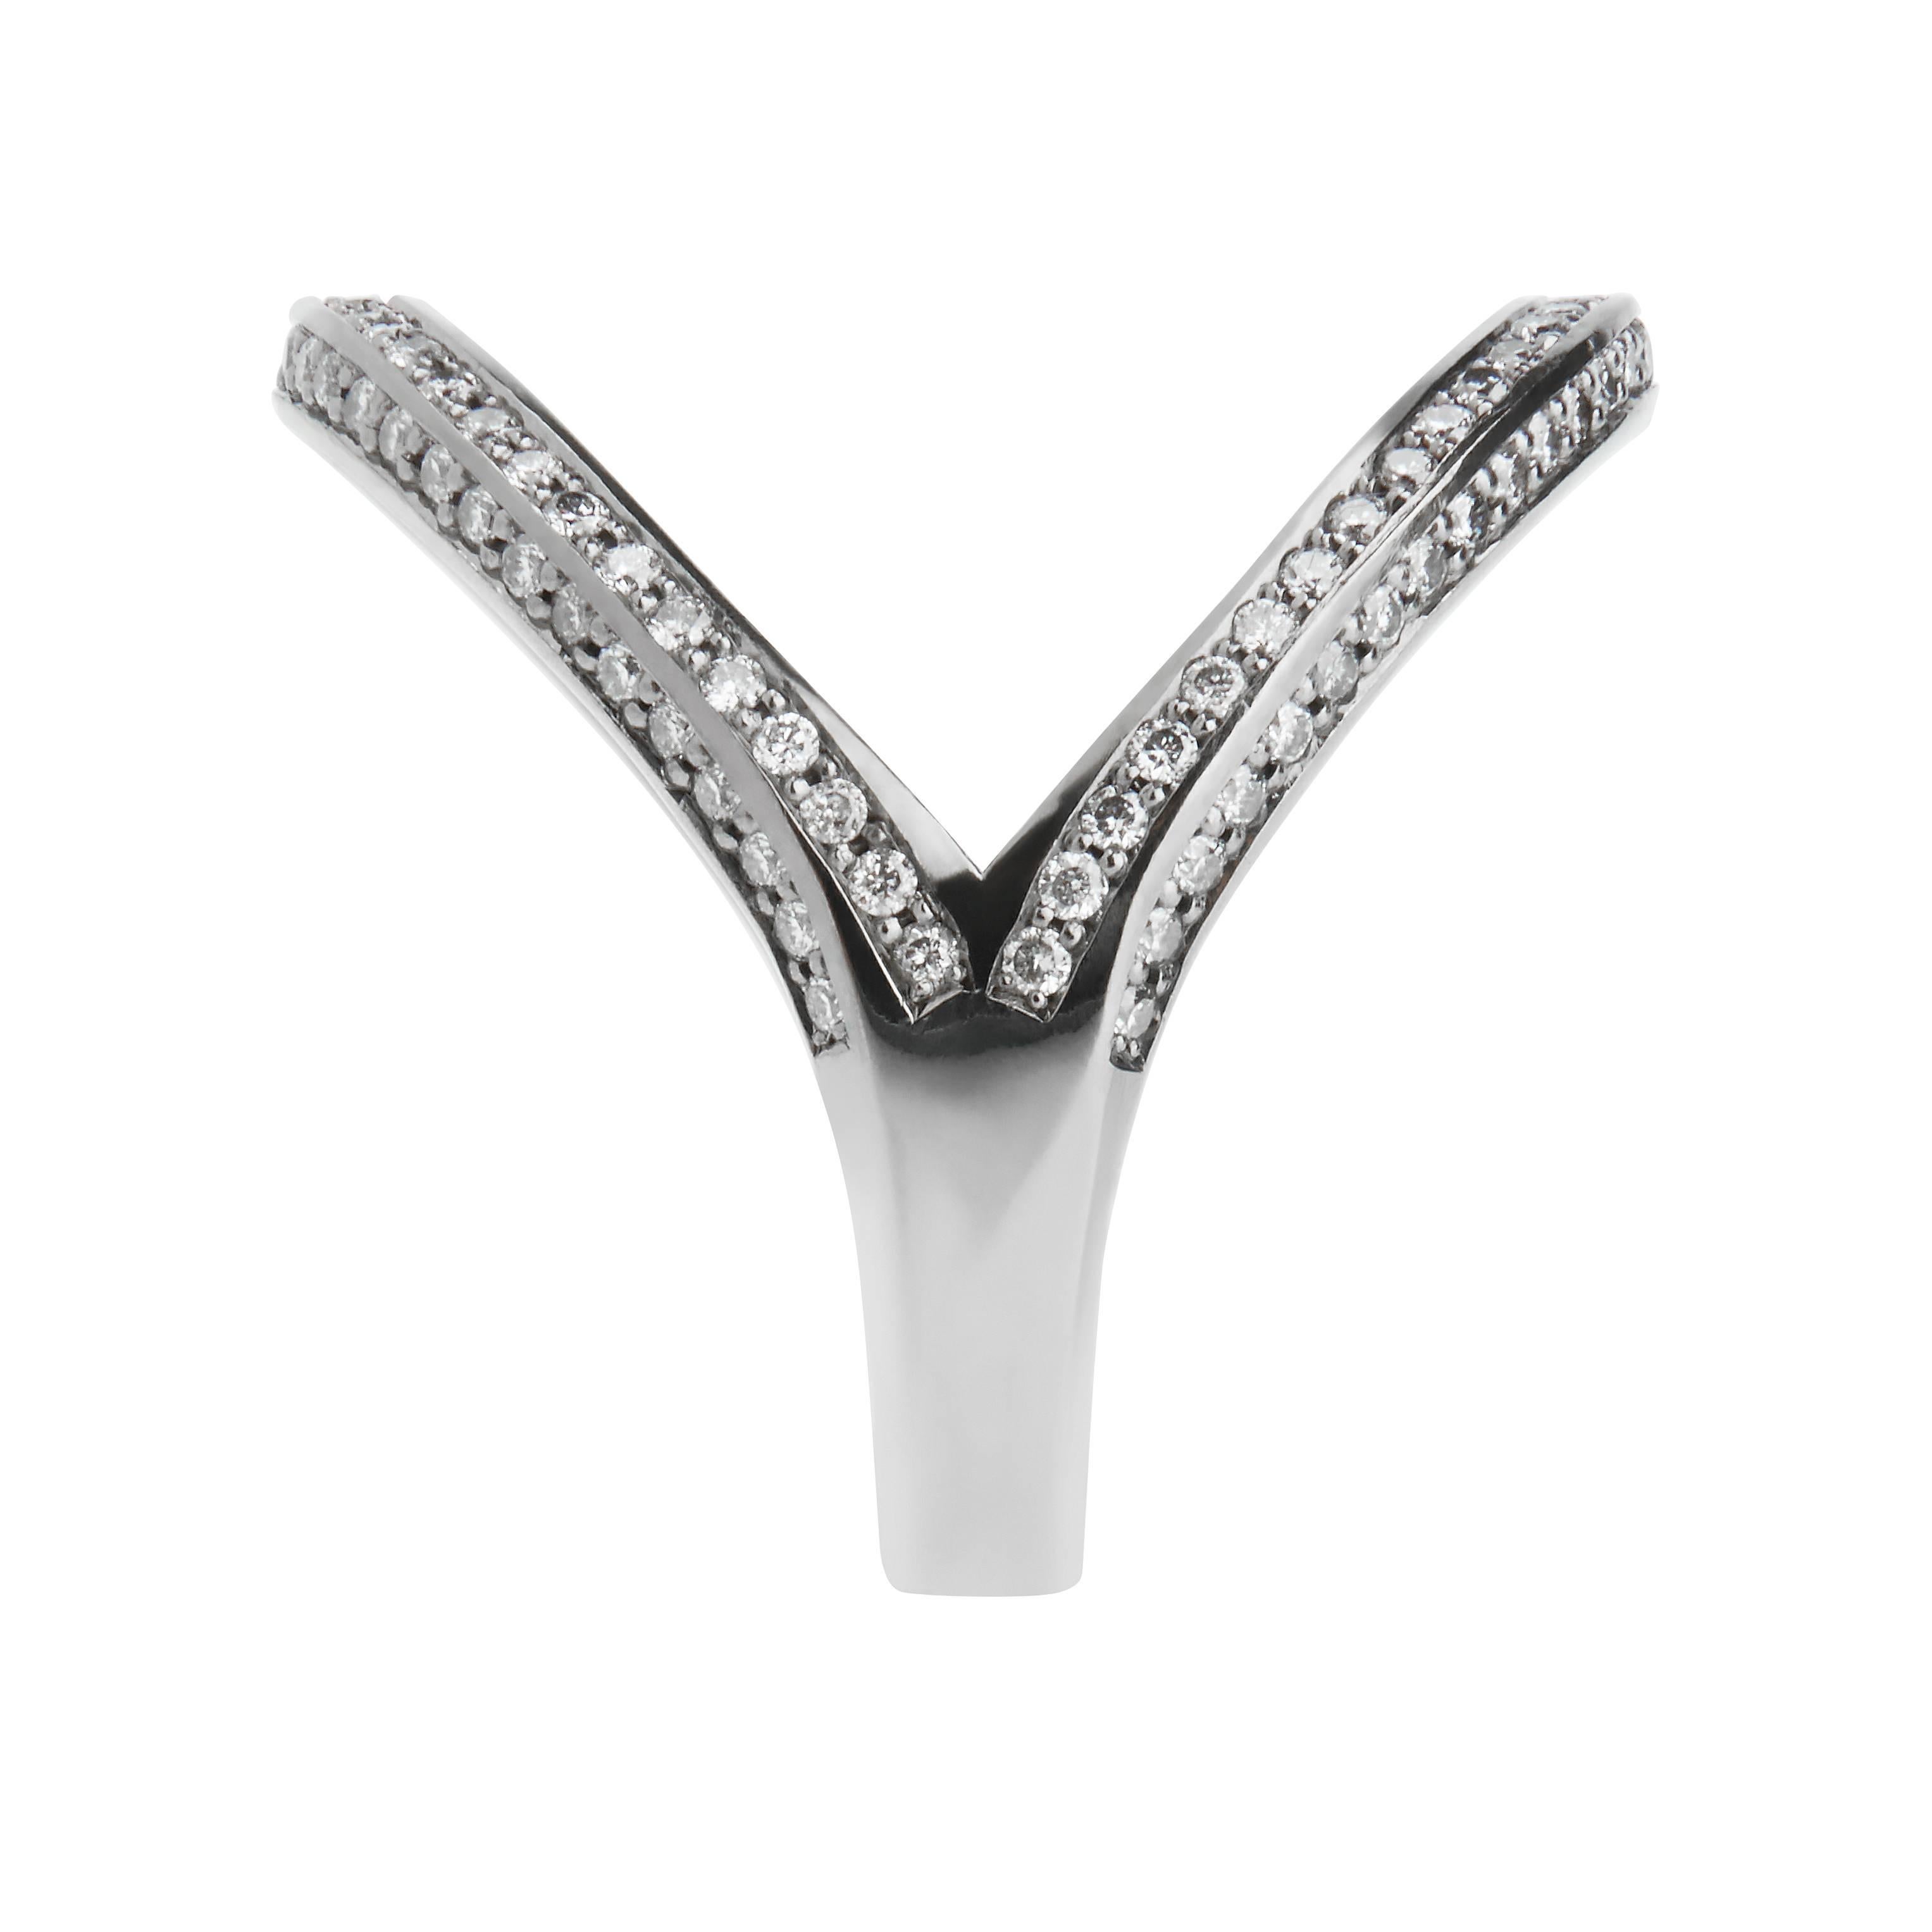 *MADE TO ORDER - 5 WEEK LEAD TIME*

9ct blackened white gold Zara Simon ring with 0.95ct of Diamonds